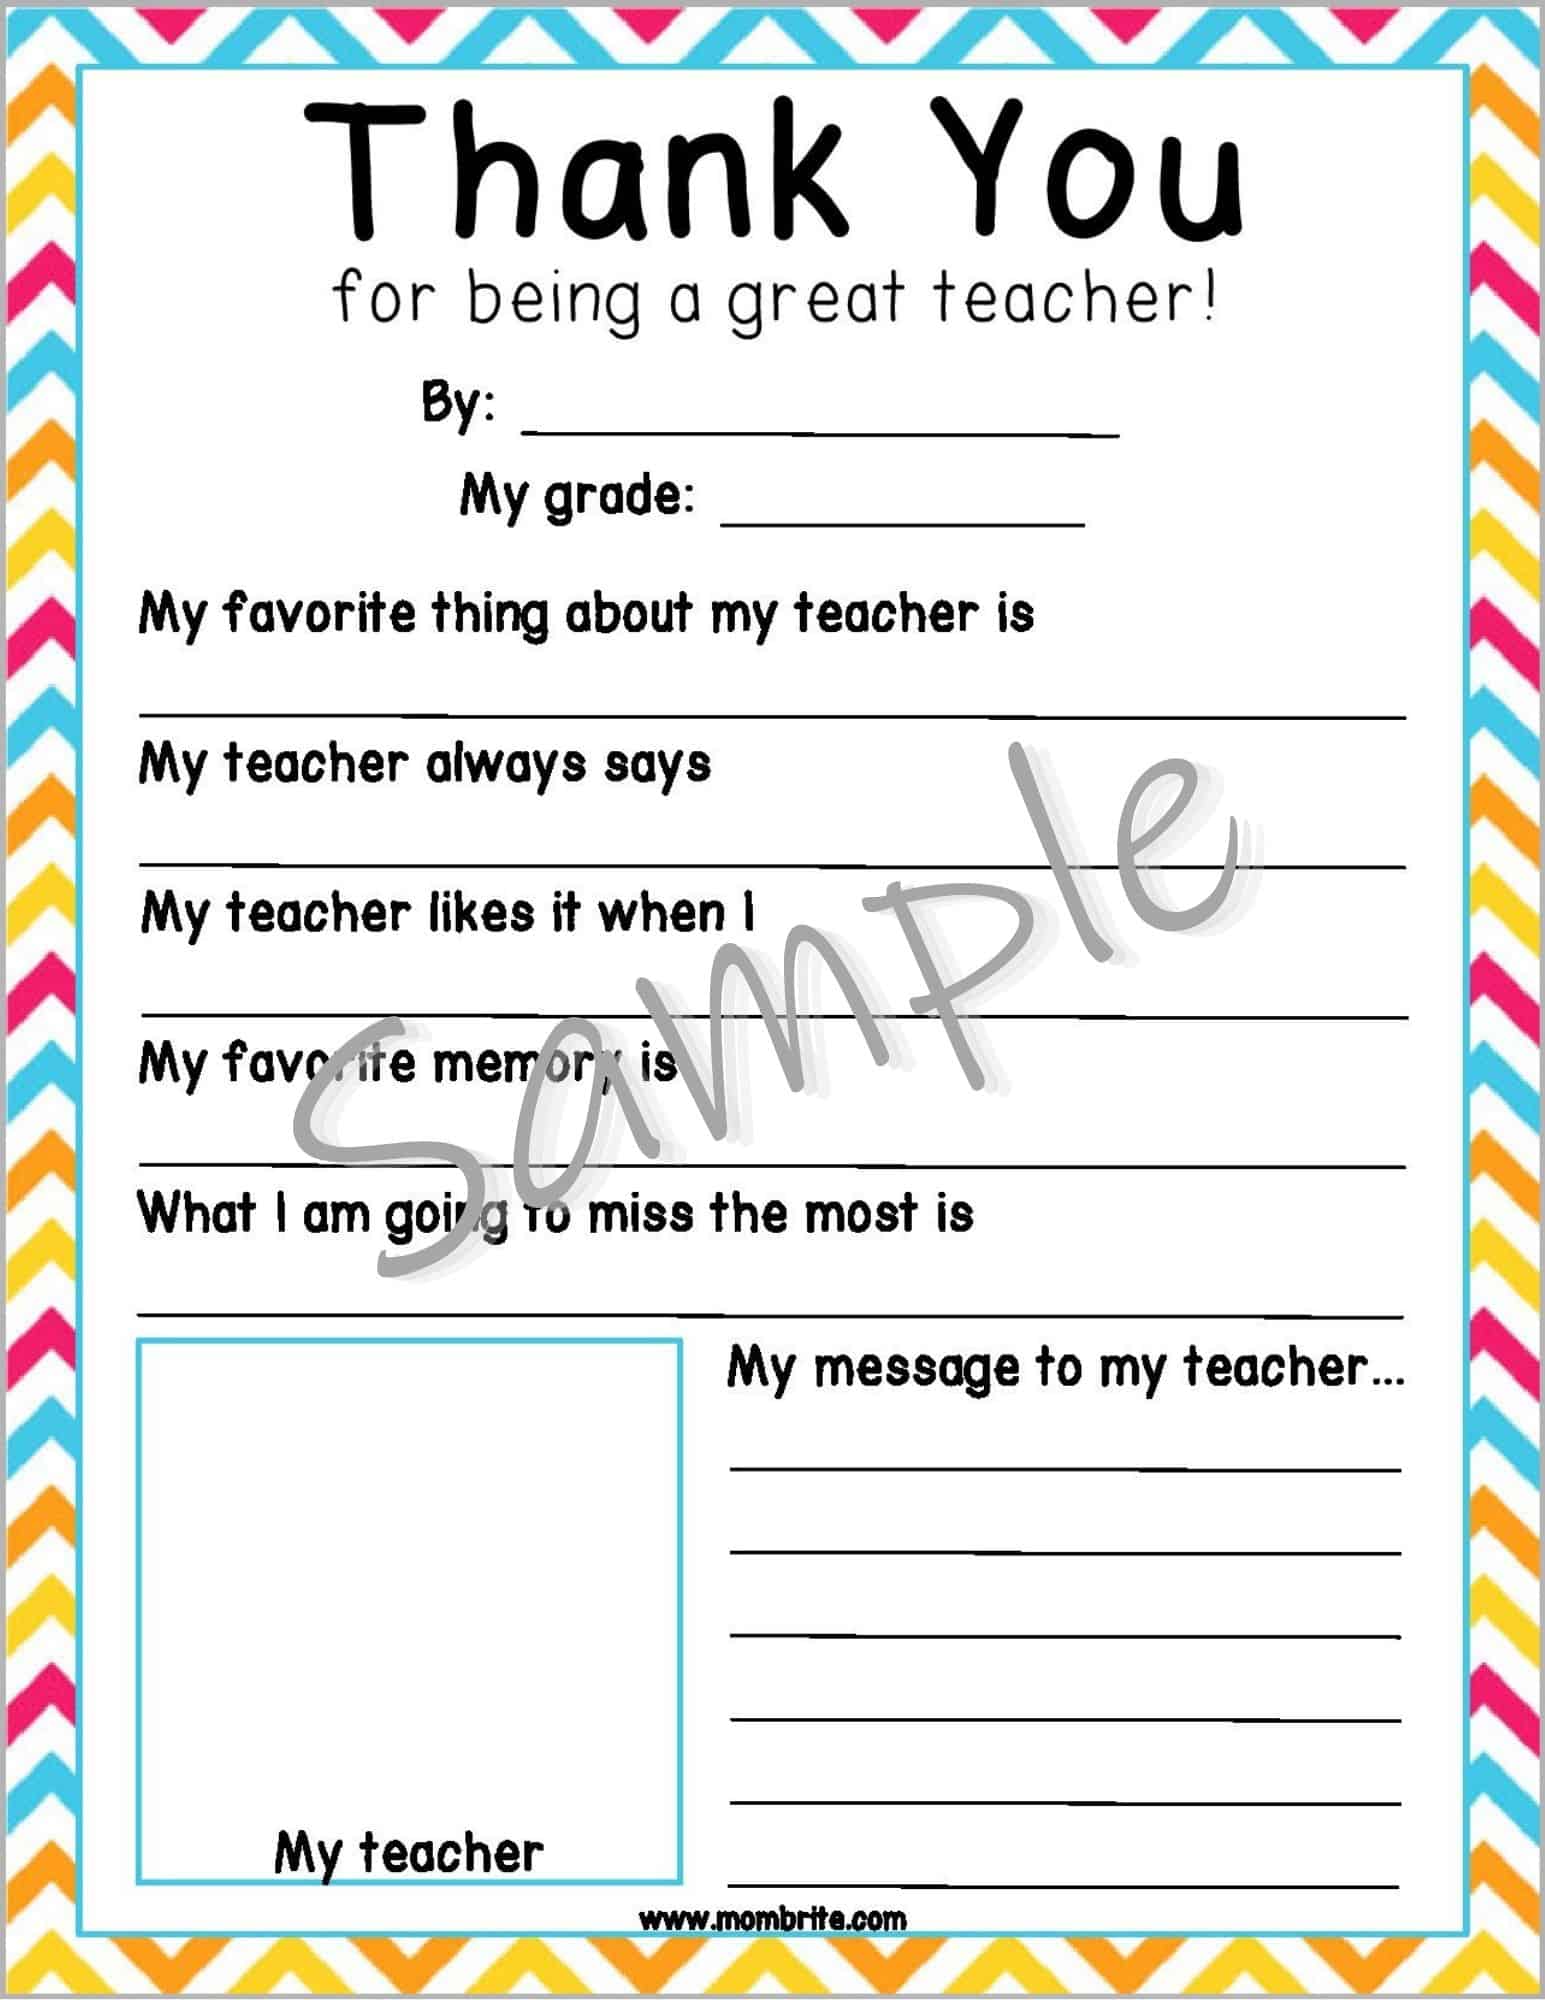 Free Thank You for Being a Great Teacher Printable  Mombrite Within Thank You Card For Teacher Template